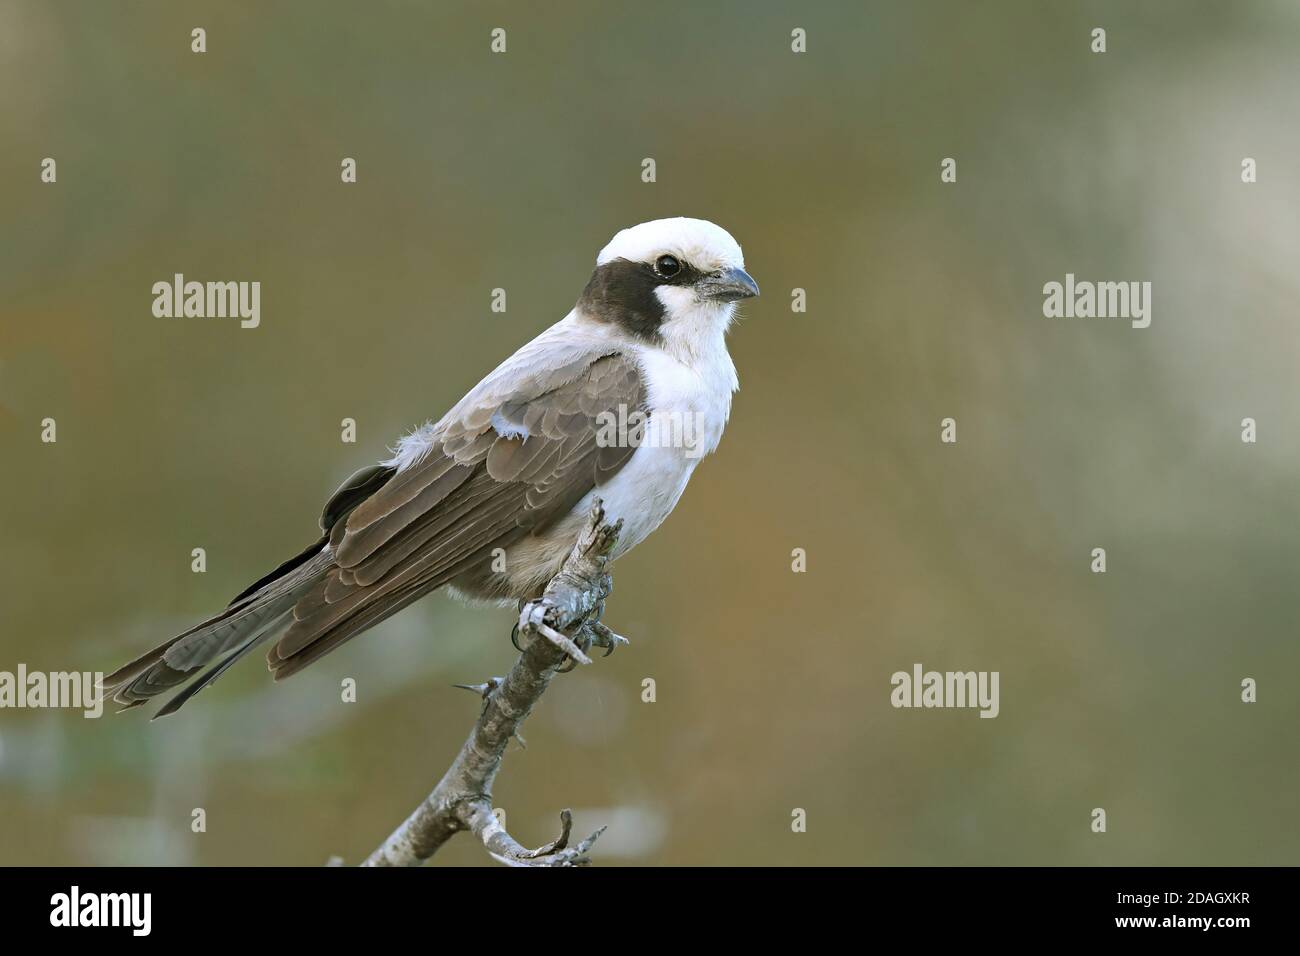 White-crowned shrike (Eurocephalus anguitimens), perched on a branch, South Africa, Lowveld, Krueger National Park Stock Photo